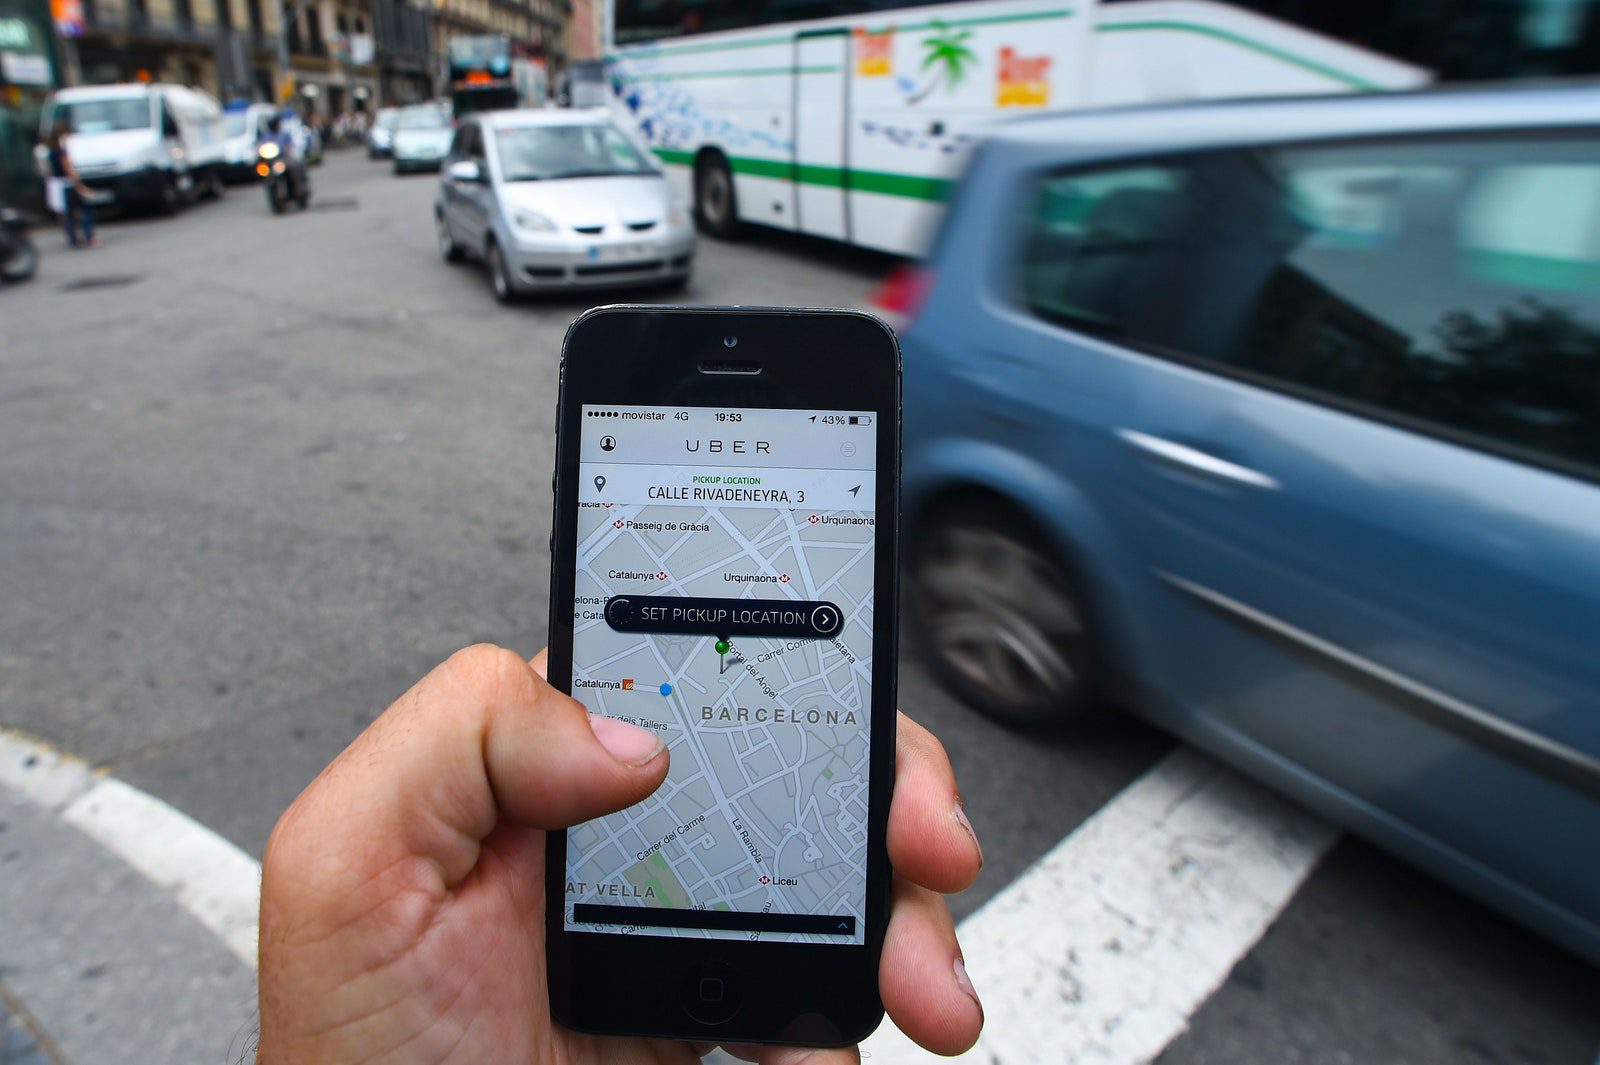 How to Track Uber Ride